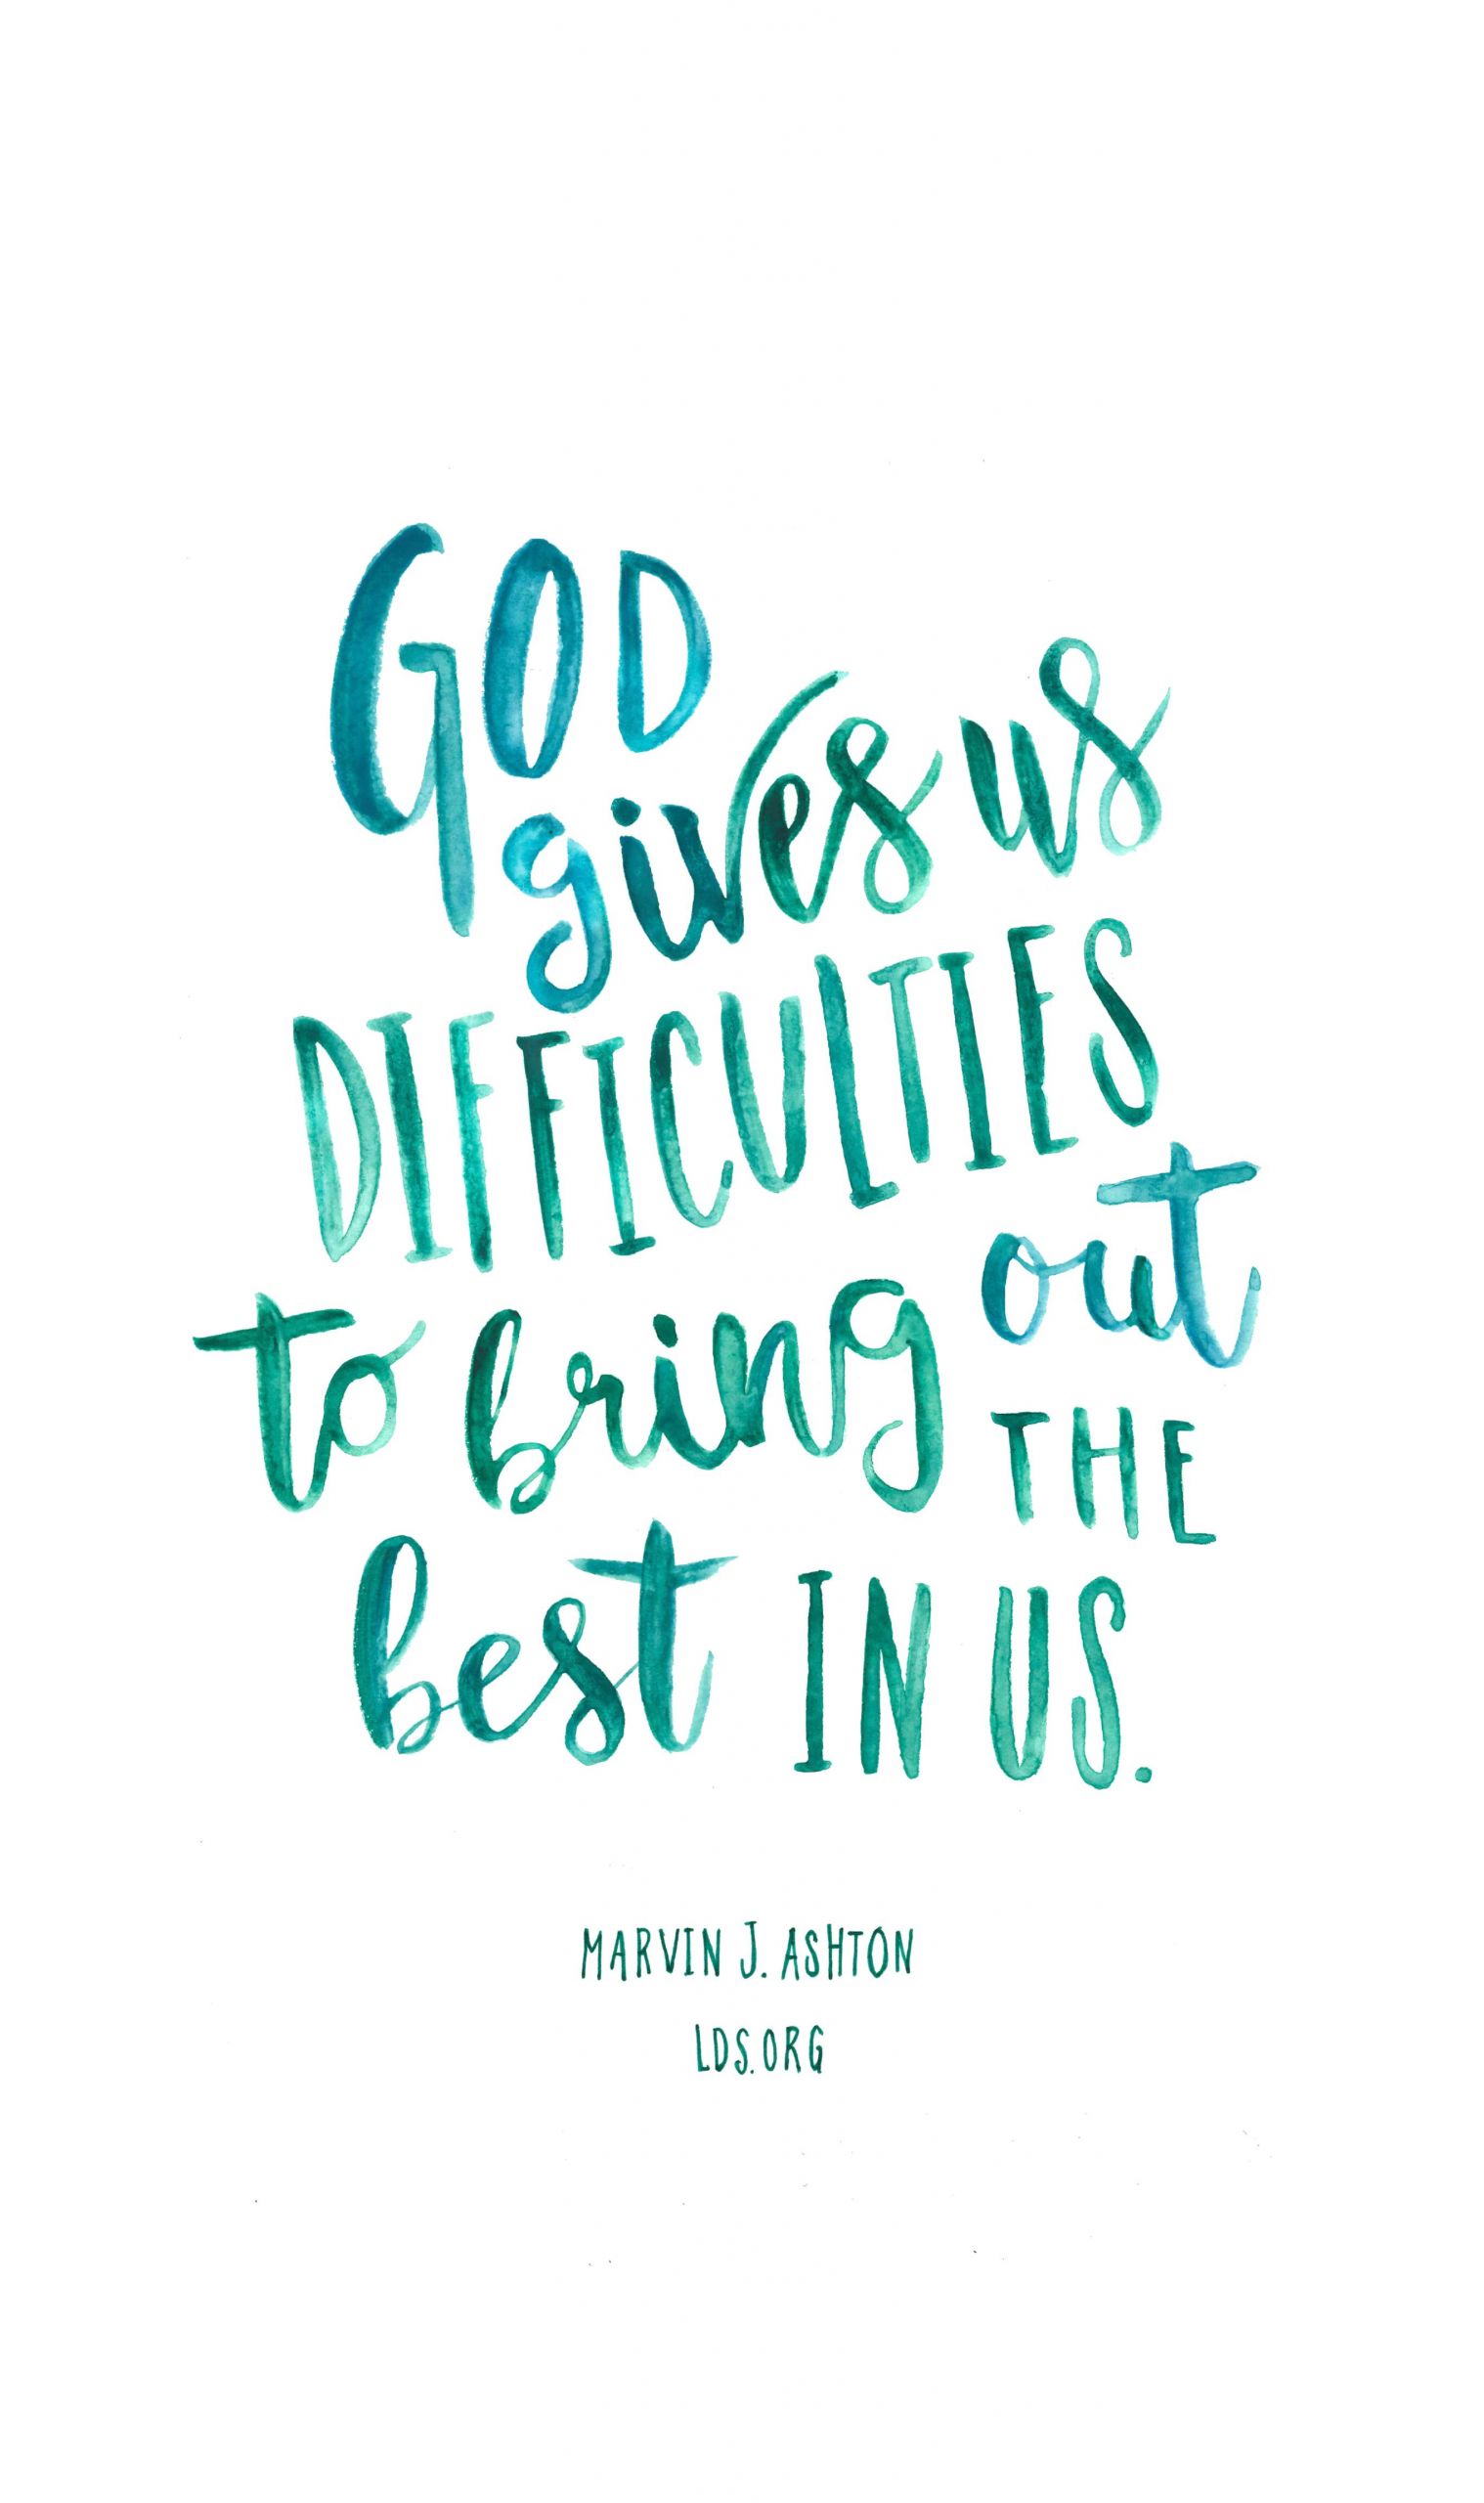 Lds Inspirational Quotes
 God gives us difficulties to bring out the best in us